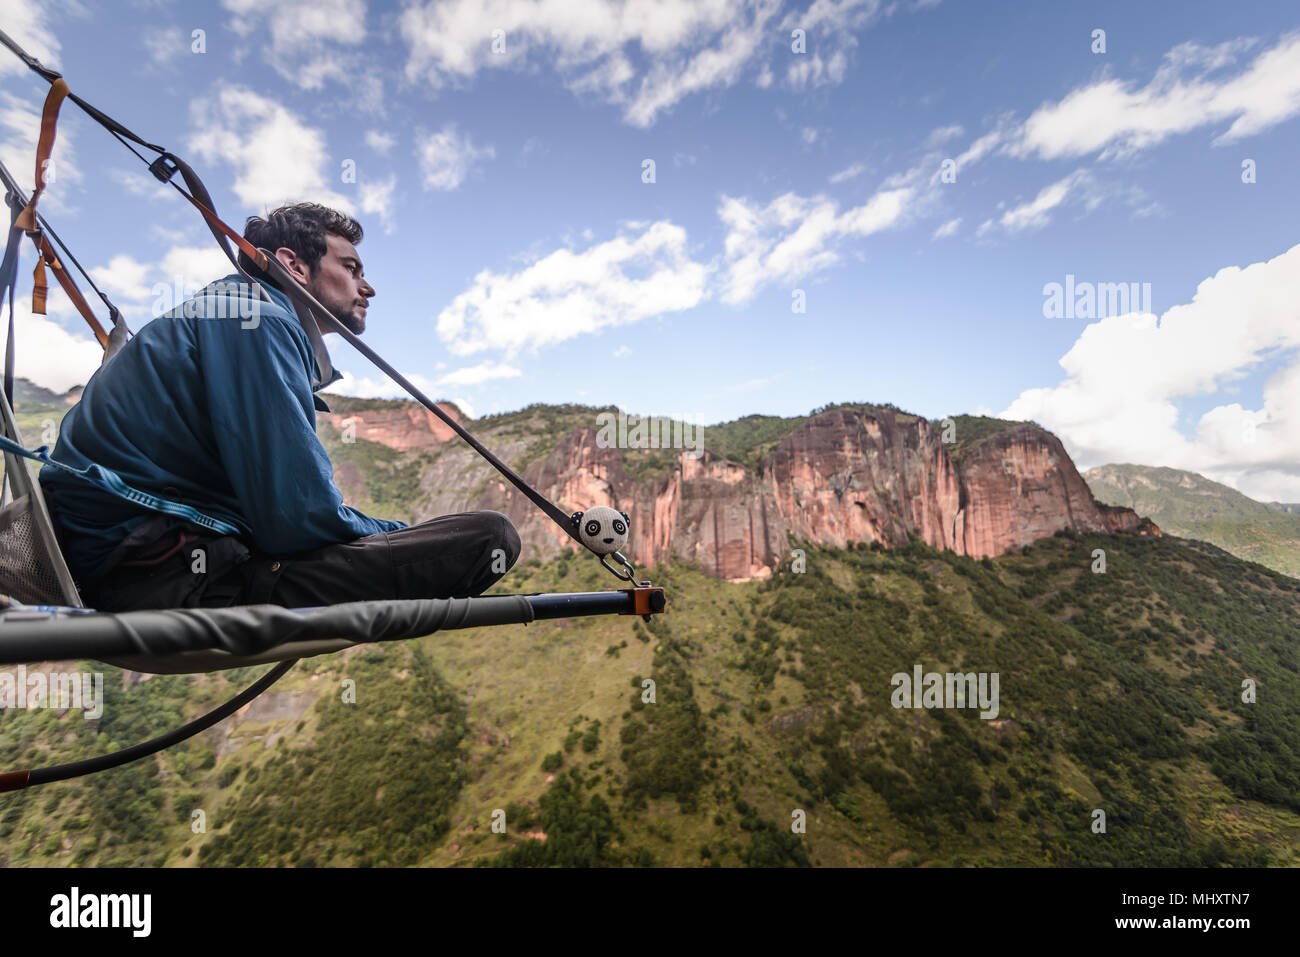 Rock climber sitting on portaledge, looking at view, Liming, Yunnan Province, China Stock Photo